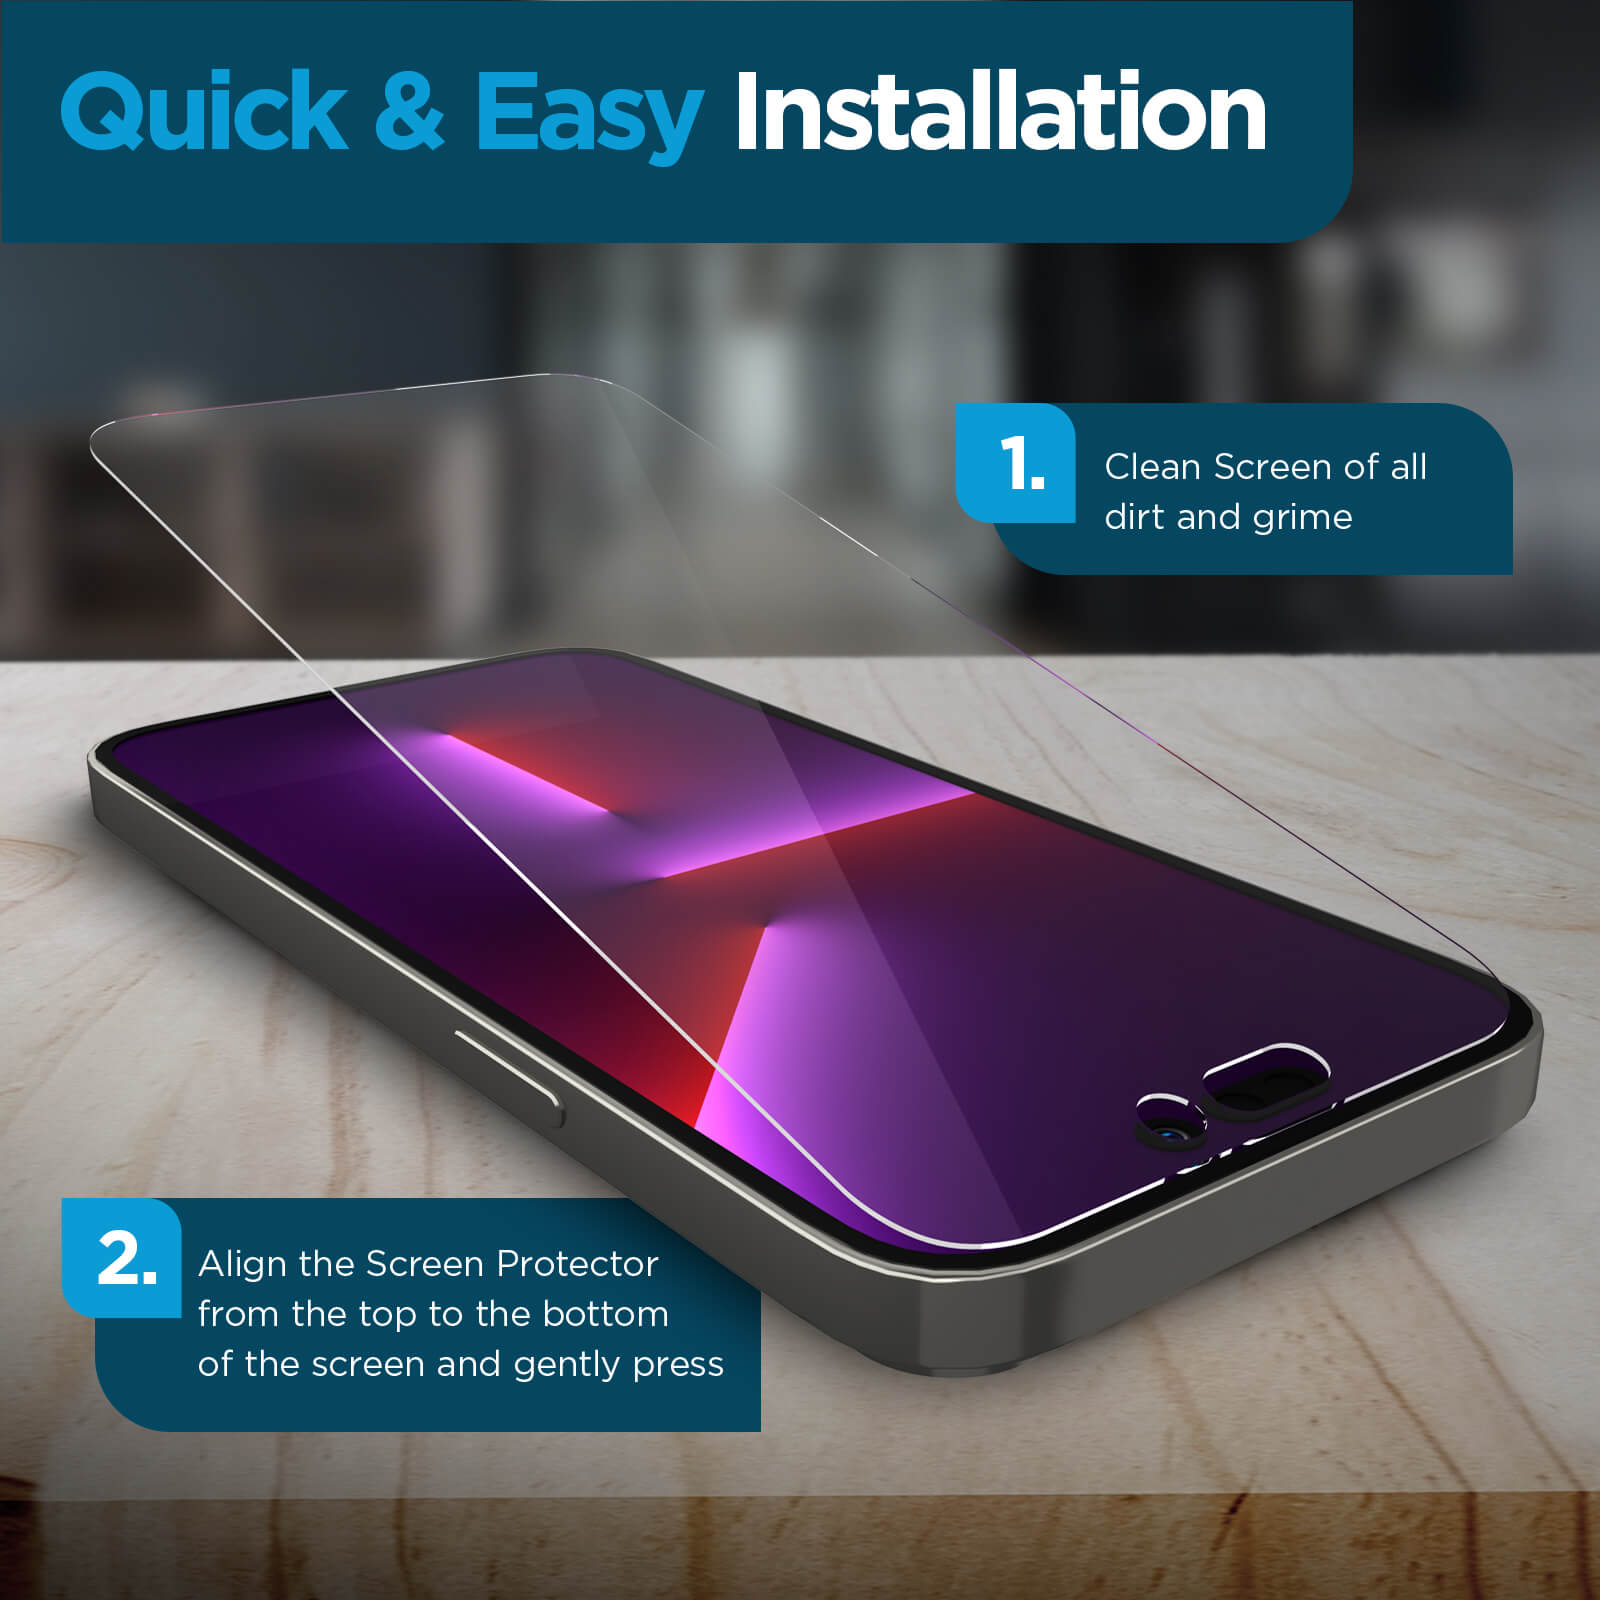 Quick & easy installation. 1. Clean screen of all dirt and grime. 2. Align the screen protector from the top to the bottom of the screen and gently press. color::Clear